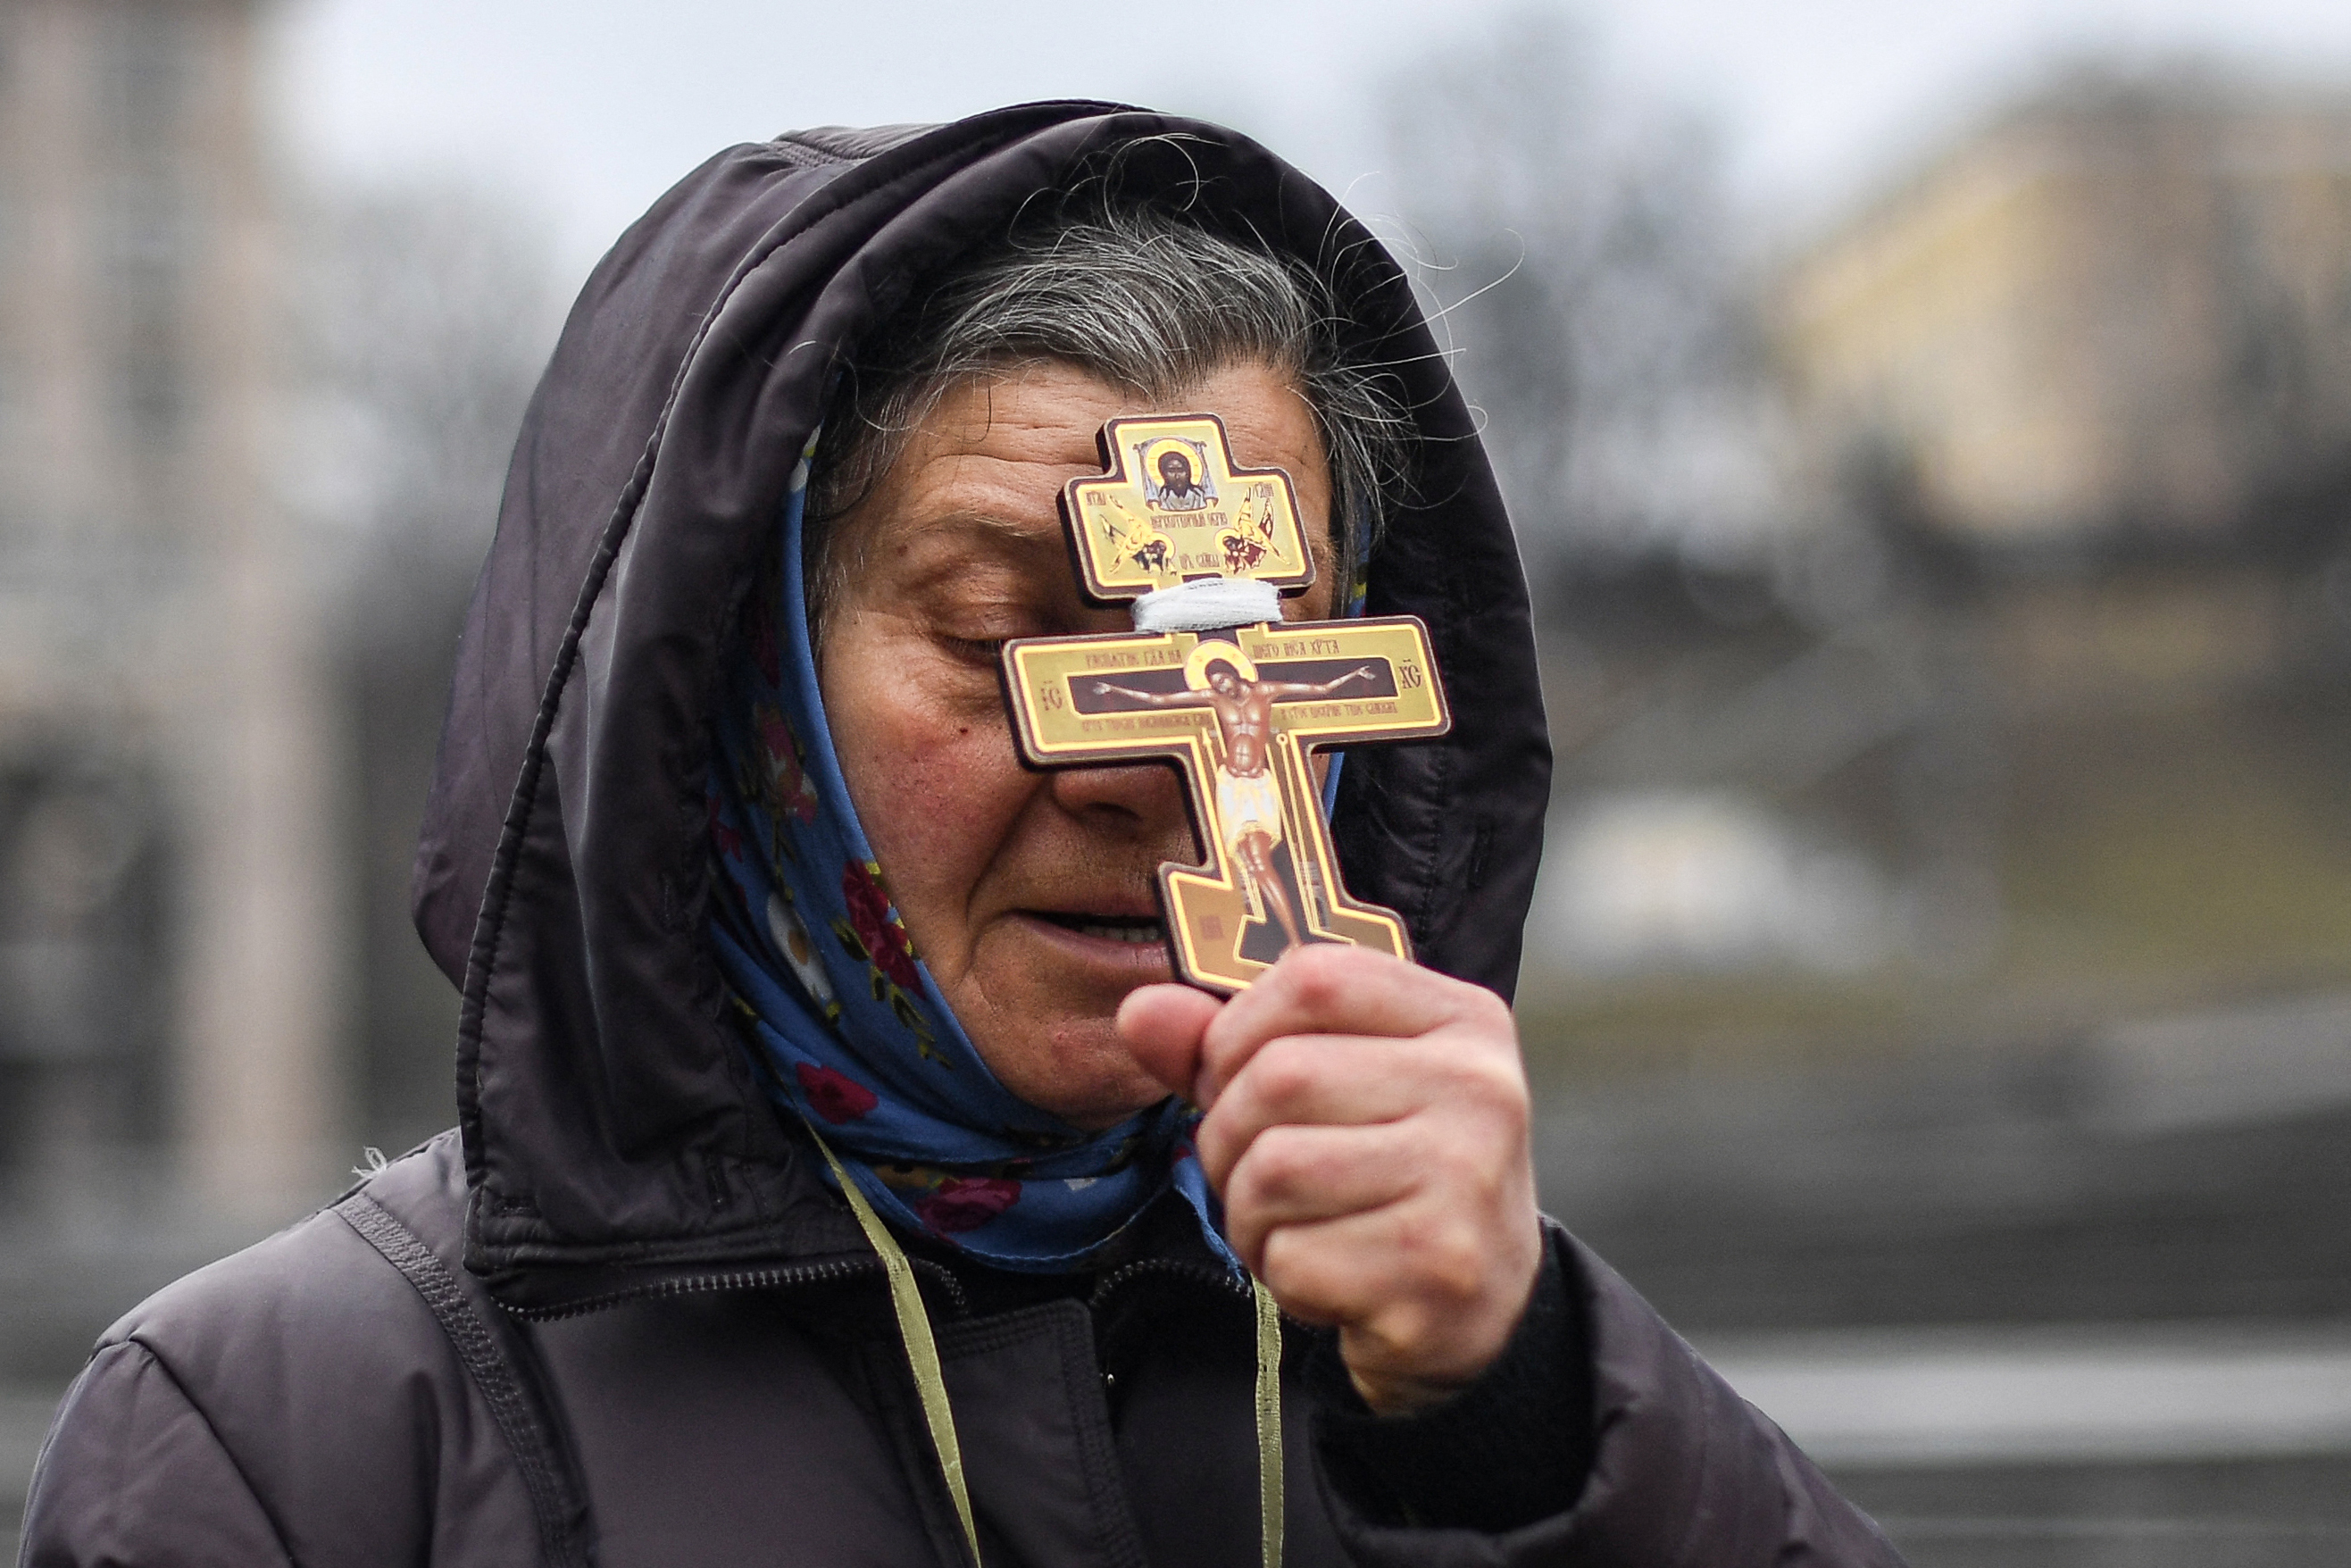 A religious woman holds a cross as she prays on Independence square in Kyiv in the morning of February 24, 2022